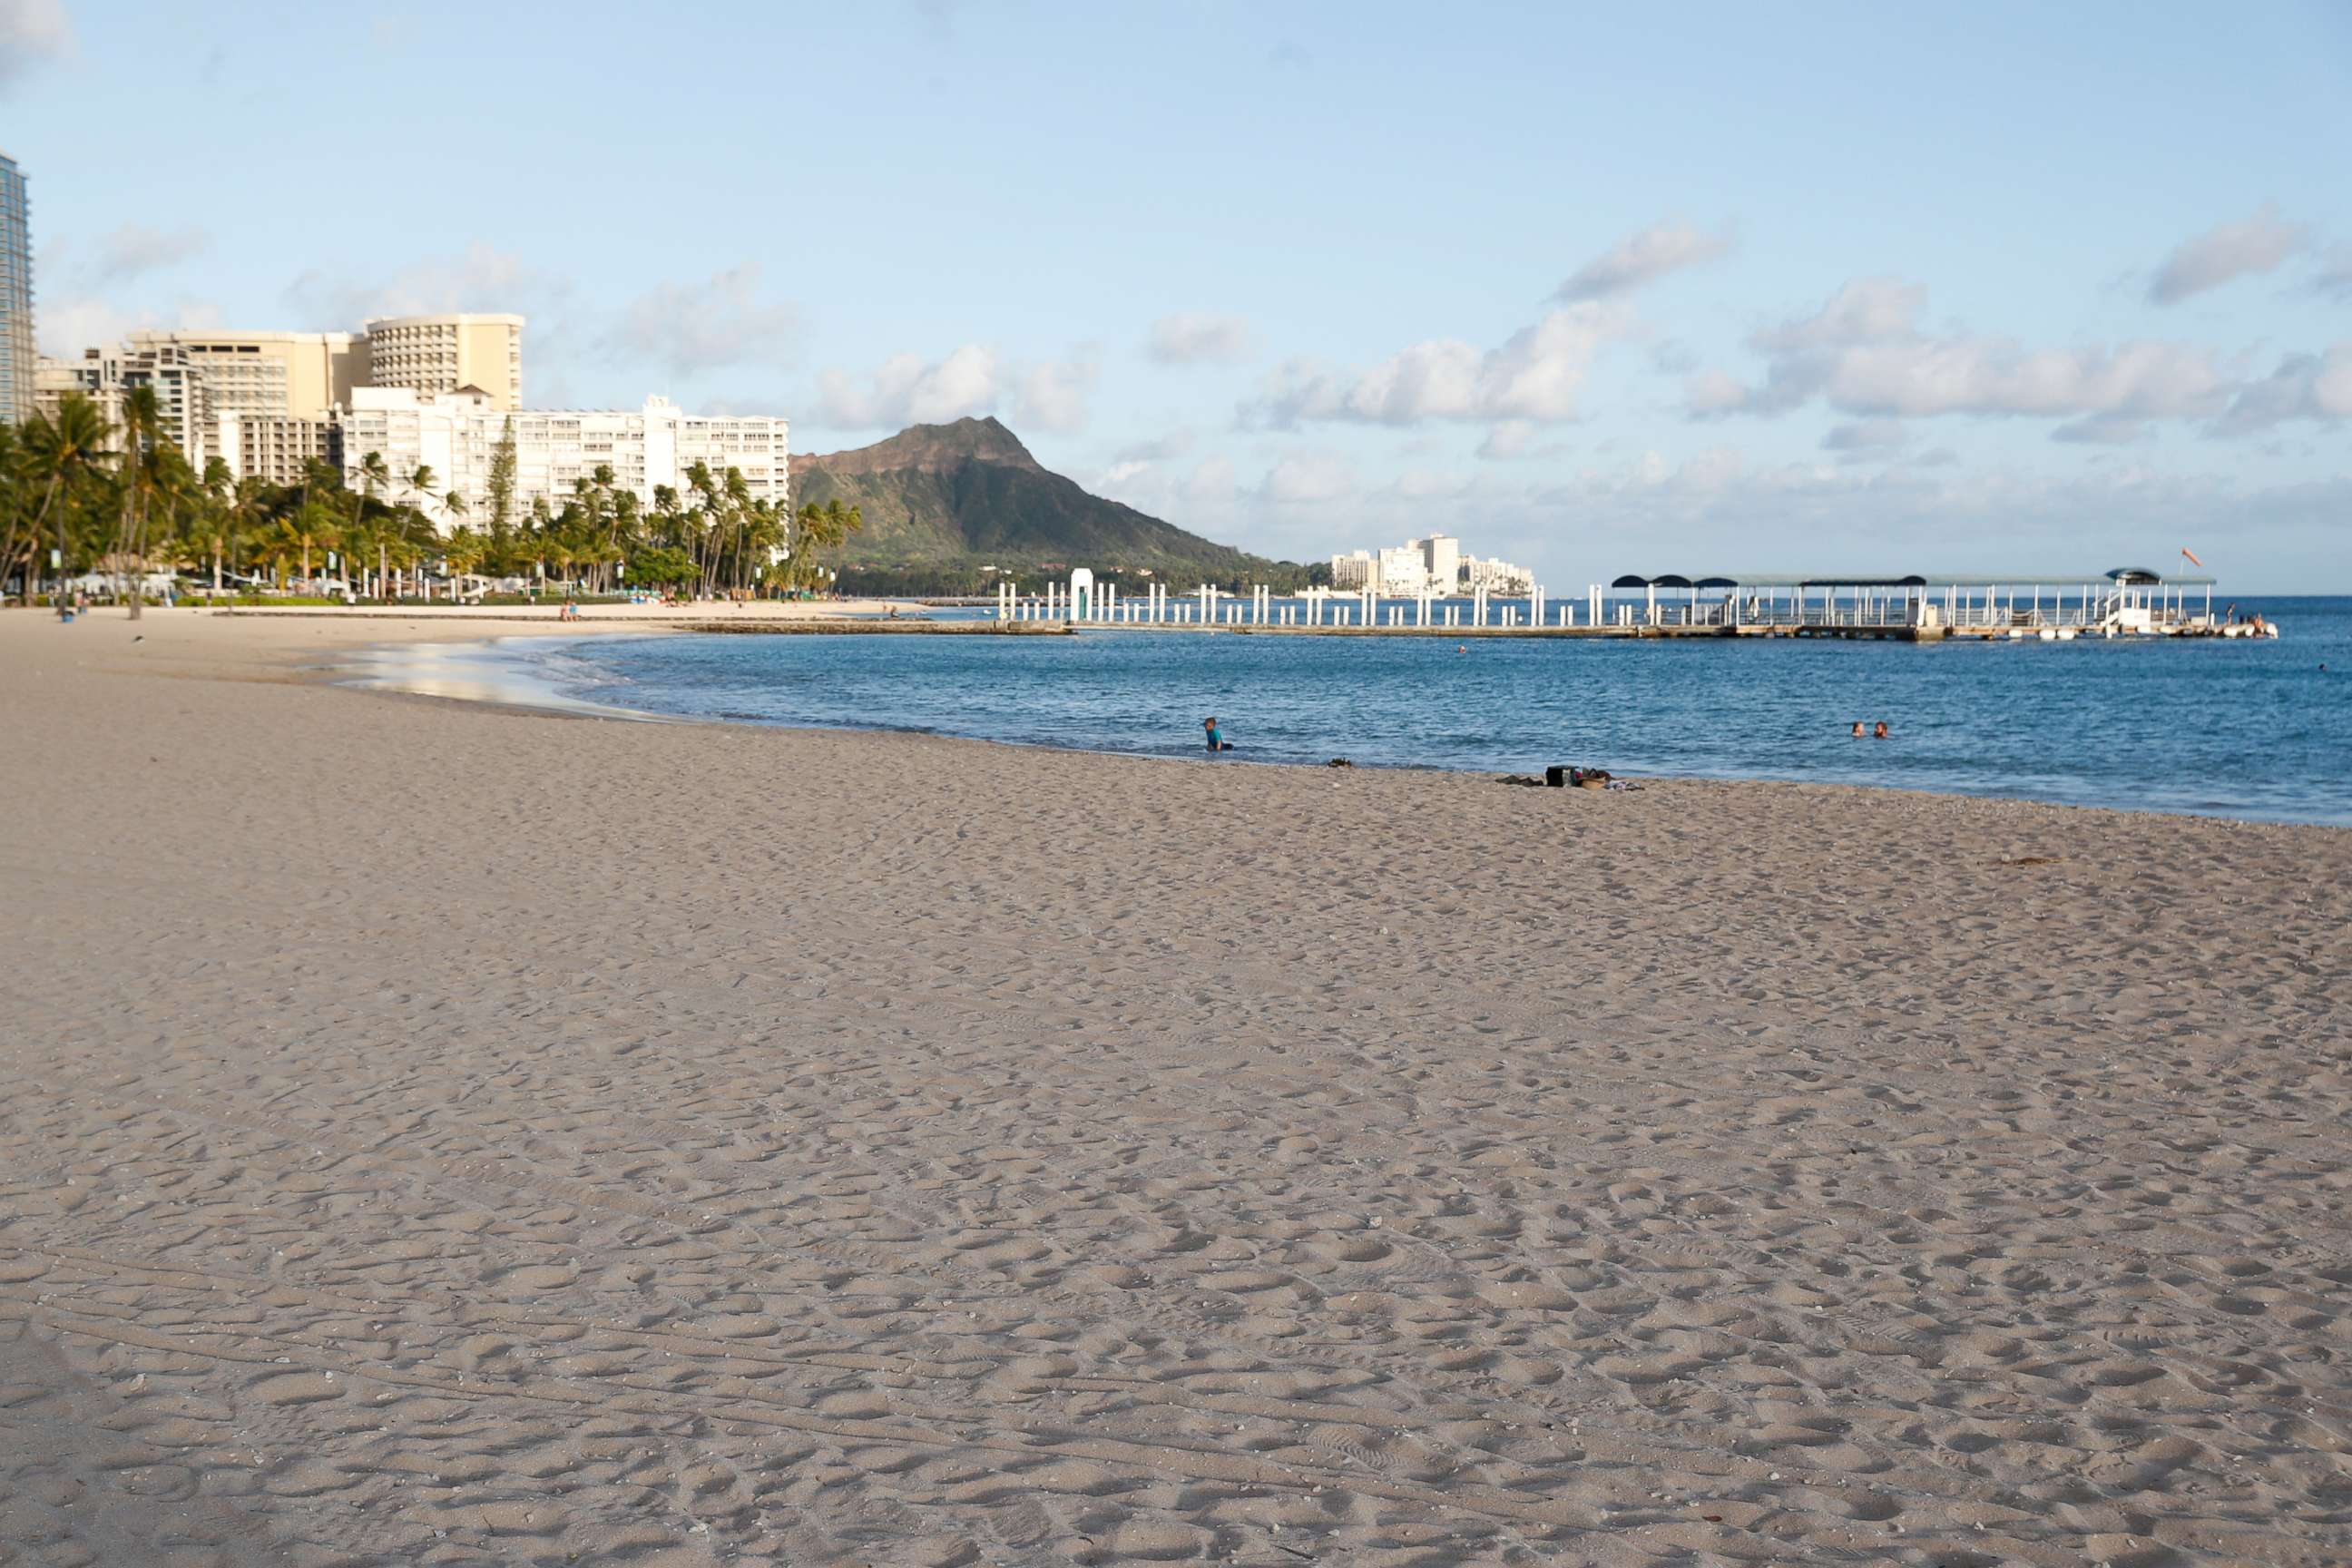 FILE PHOTO: Waikiki Beach is nearly empty due to the business downturn caused by the coronavirus disease (COVID-19) in Honolulu, Hawaii, U.S. April 28, 2020. Picture taken April 28, 2020.